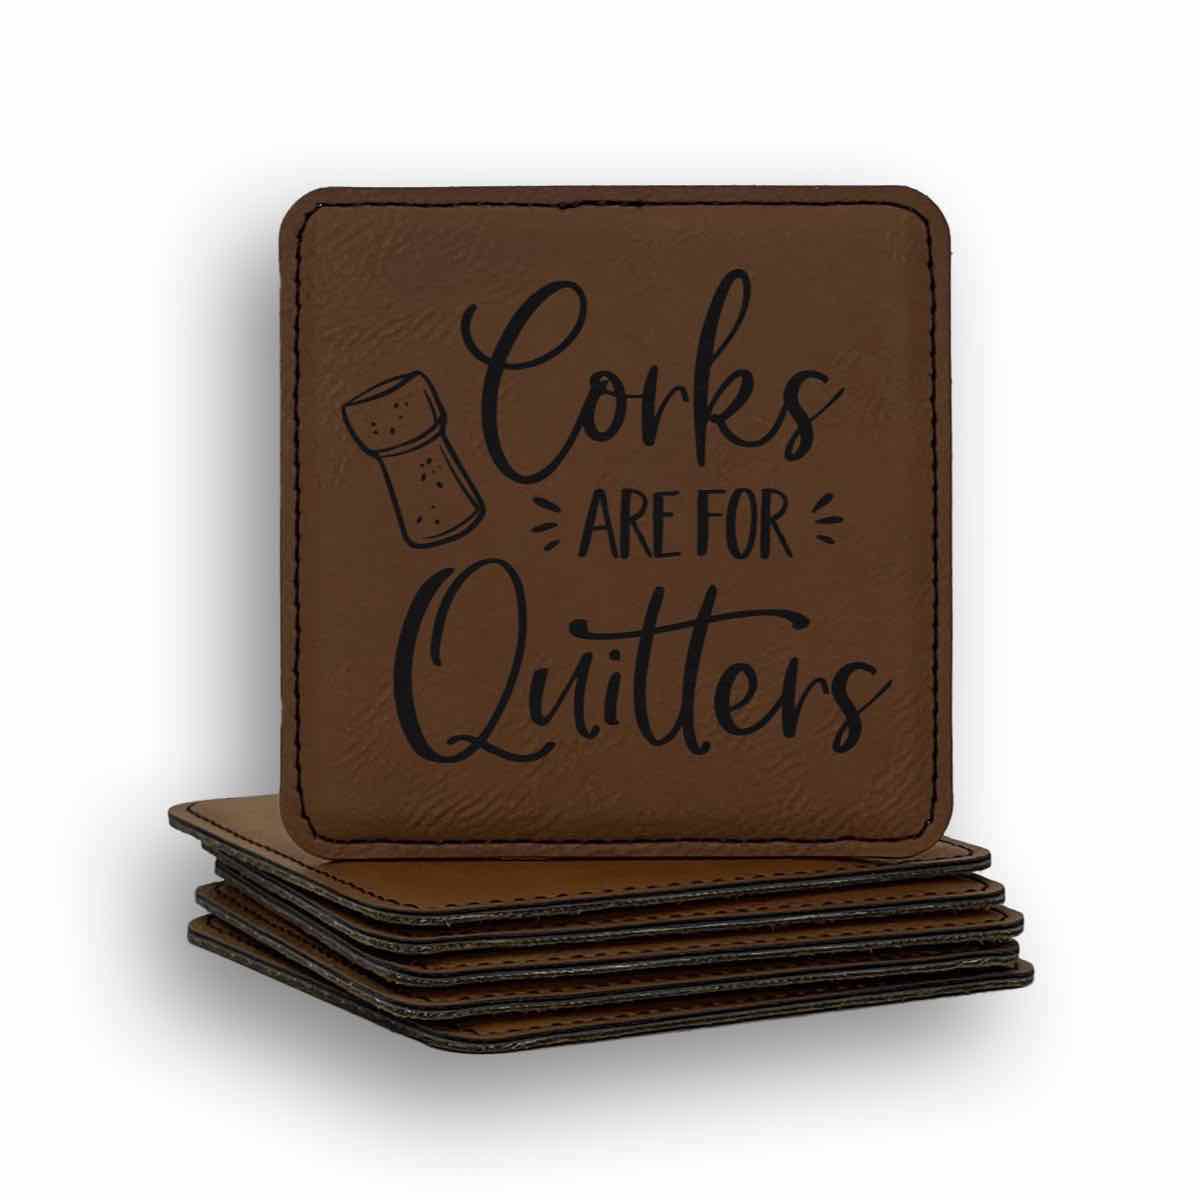 Corks Are For Coaster